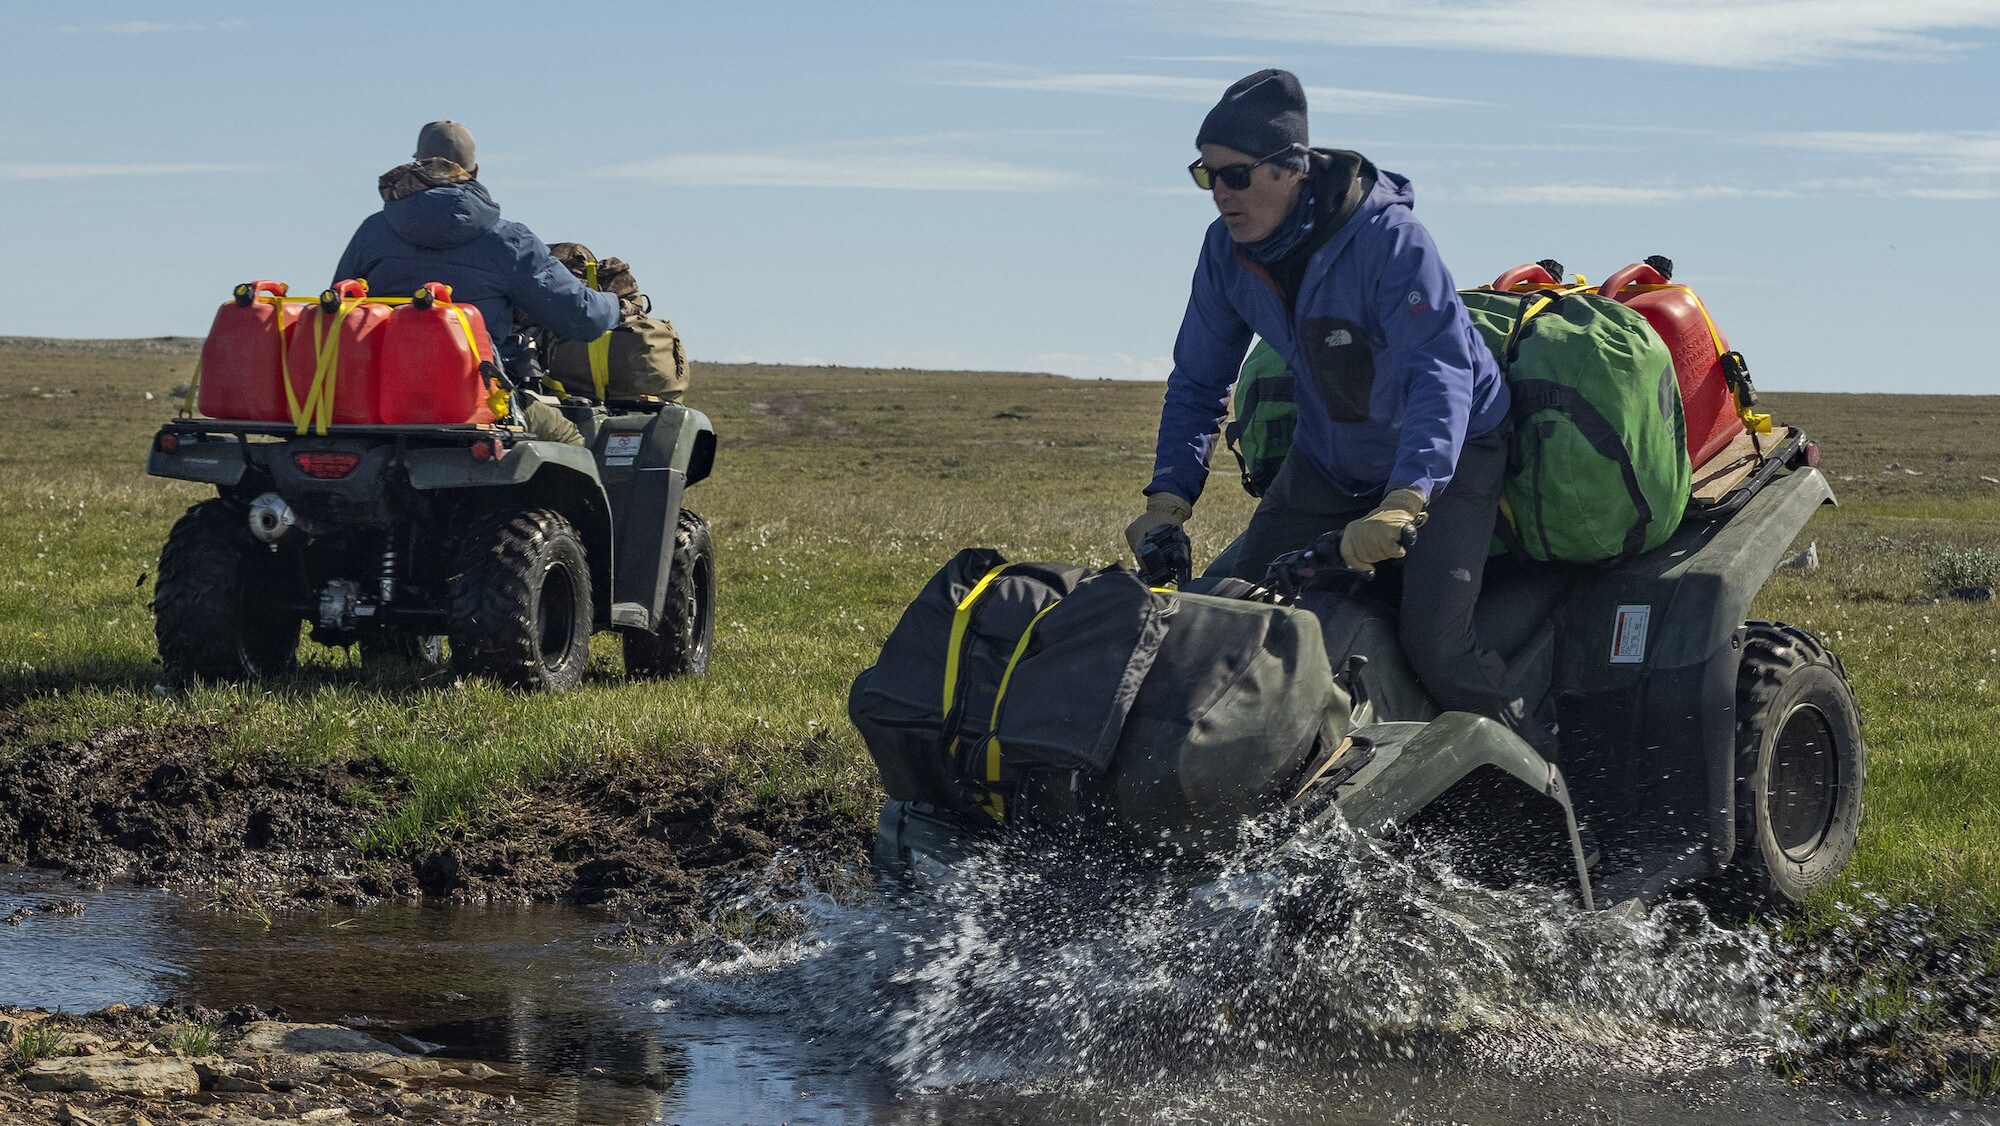 Explorer Mark Synnott rides his ATV into water during his journey in search of Sir John Franklin's lost tomb on King William Island, Nunavut, Canada. (National Geographic/Renan Ozturk)